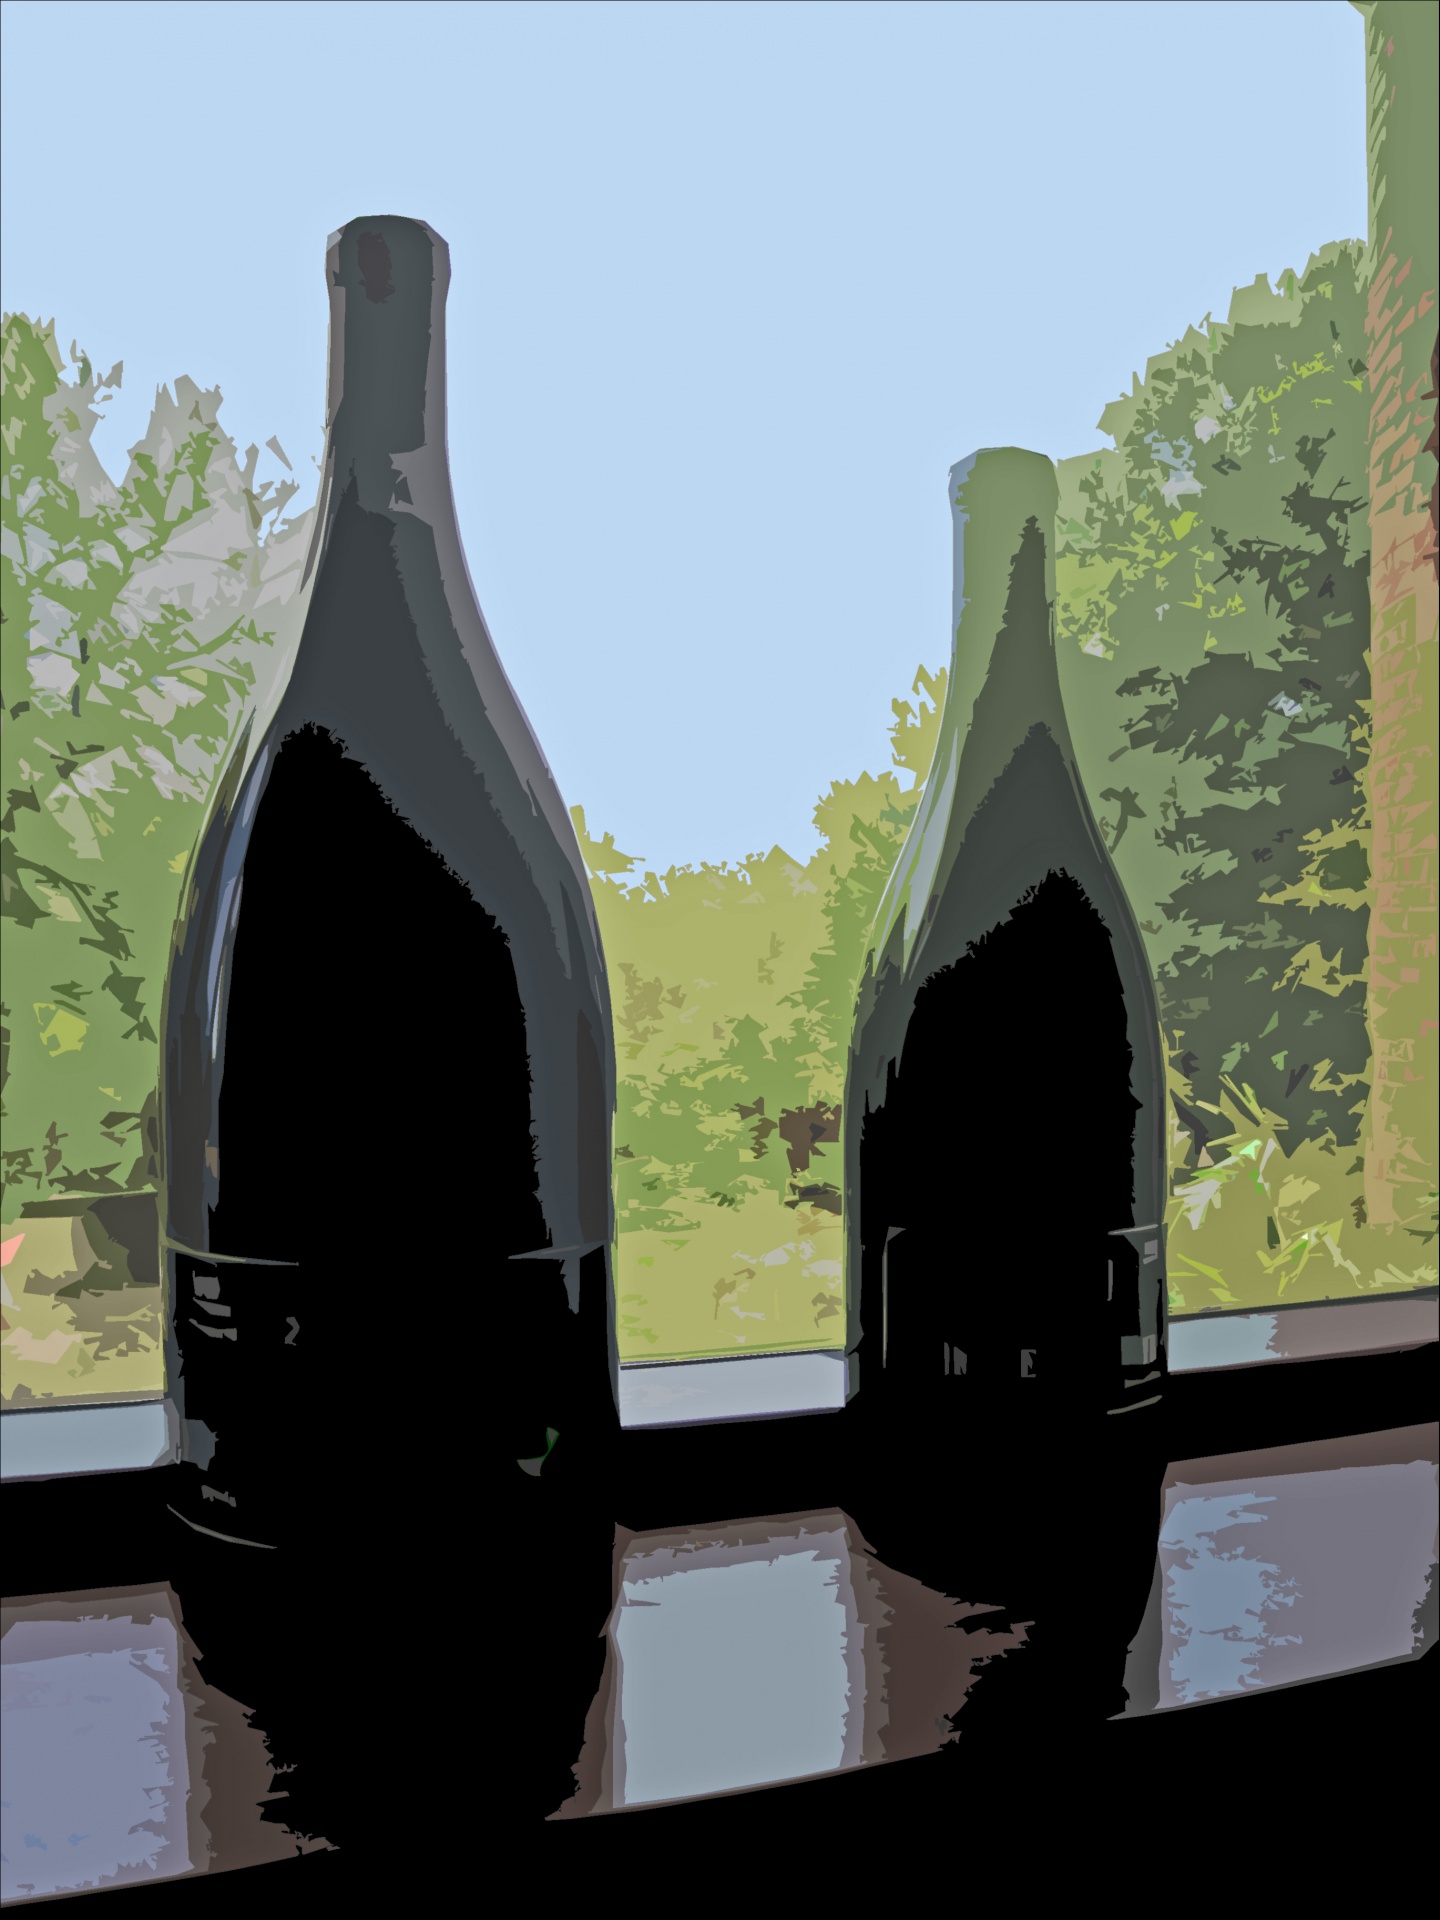 Cutout Image Of Two Wine Bottles